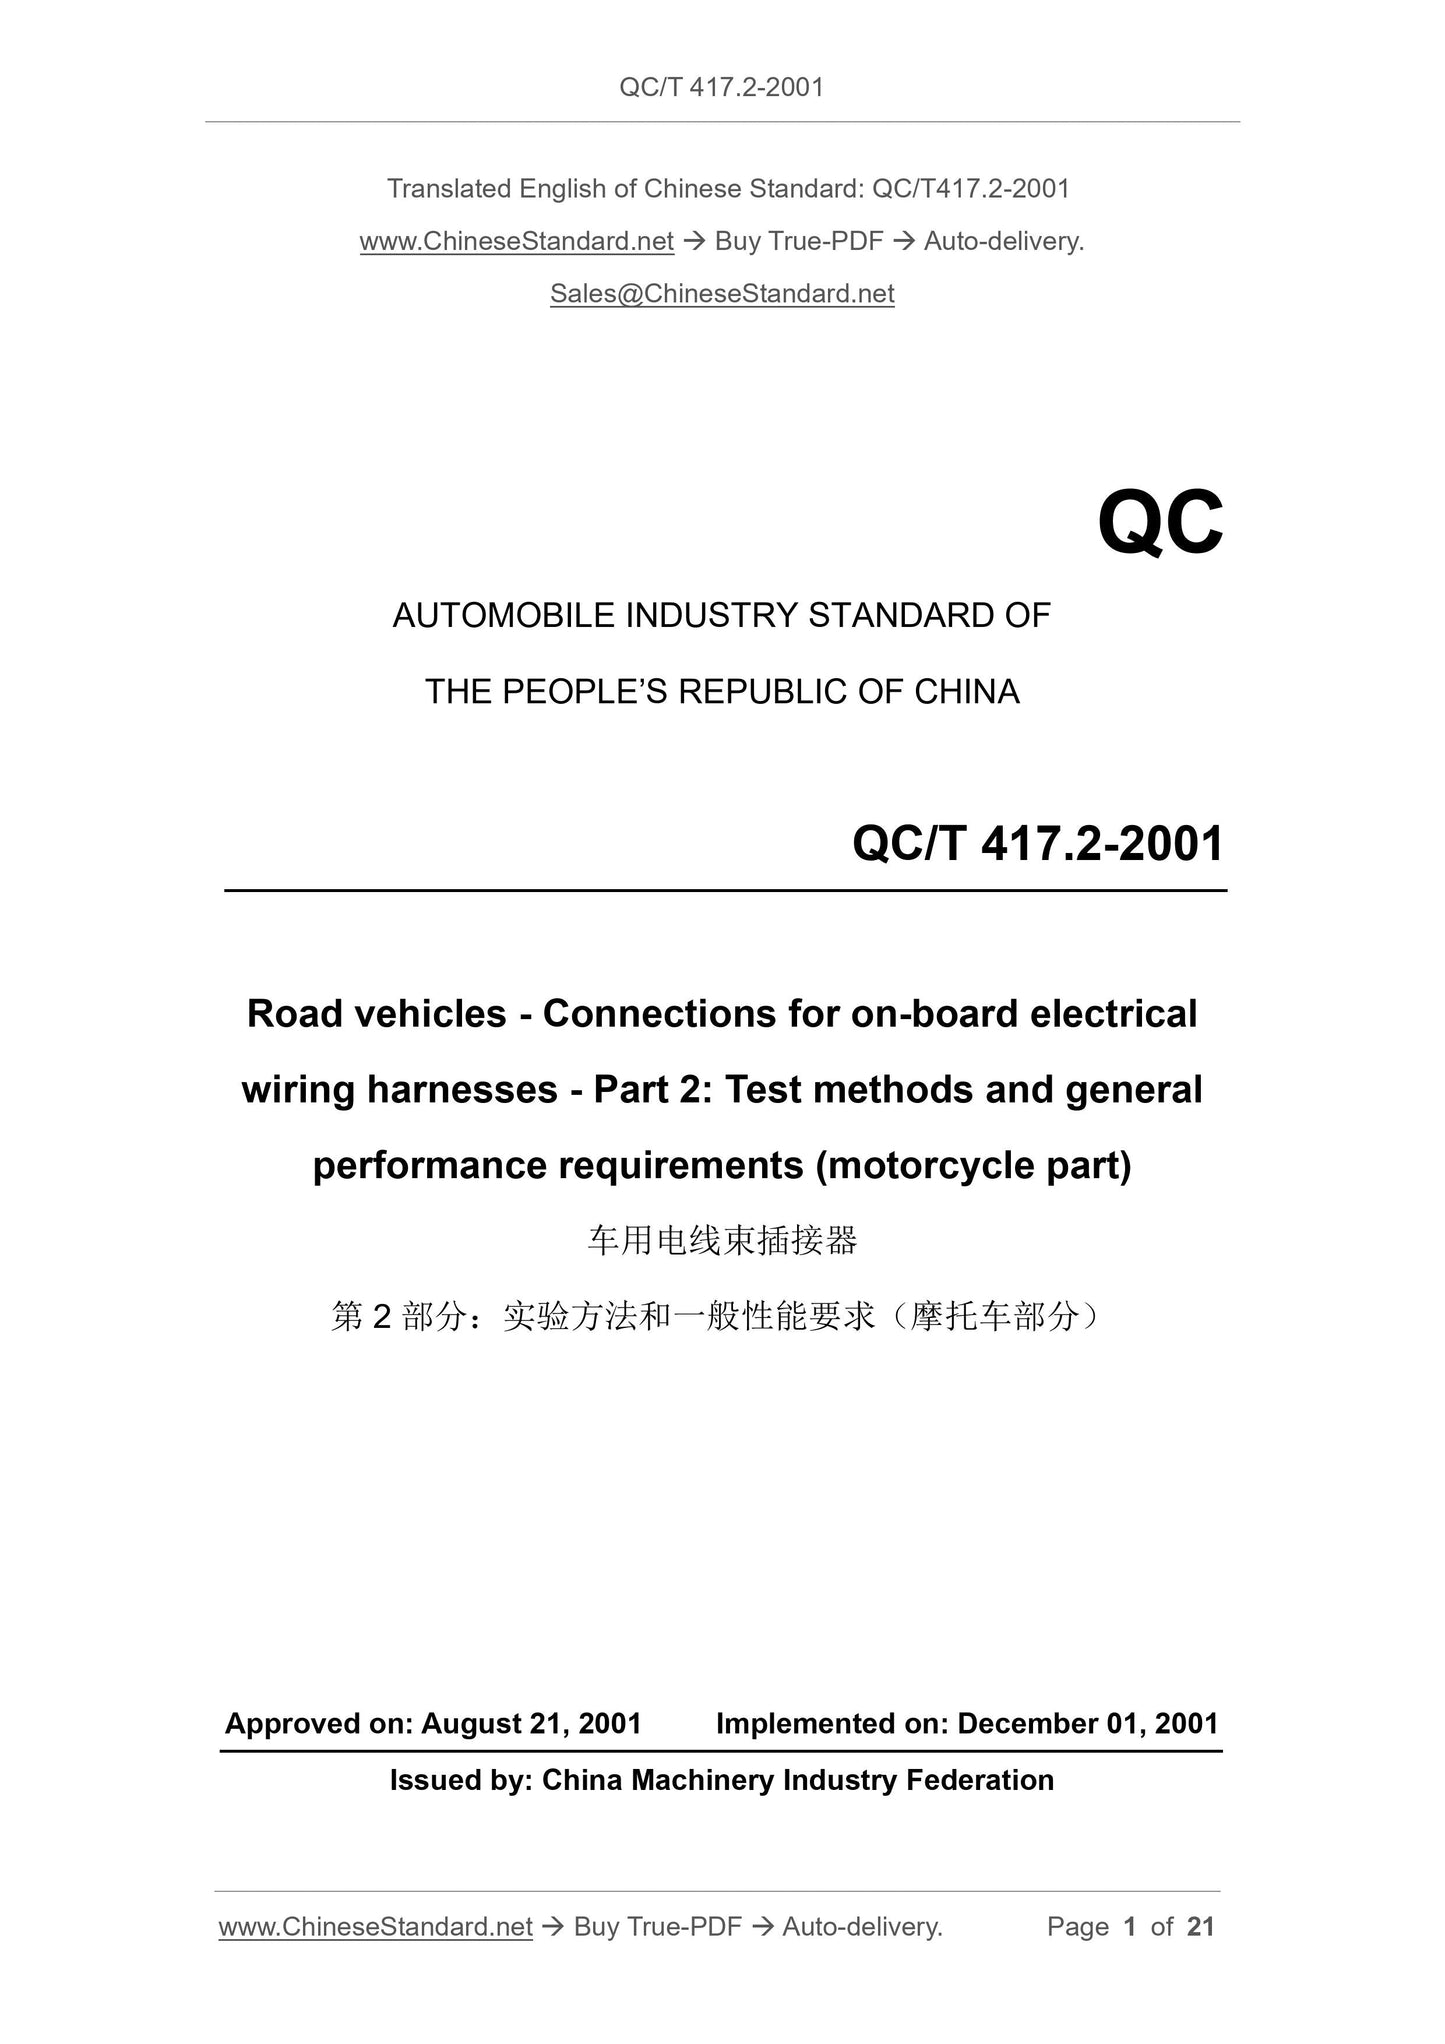 QC/T 417.2-2001 Page 1